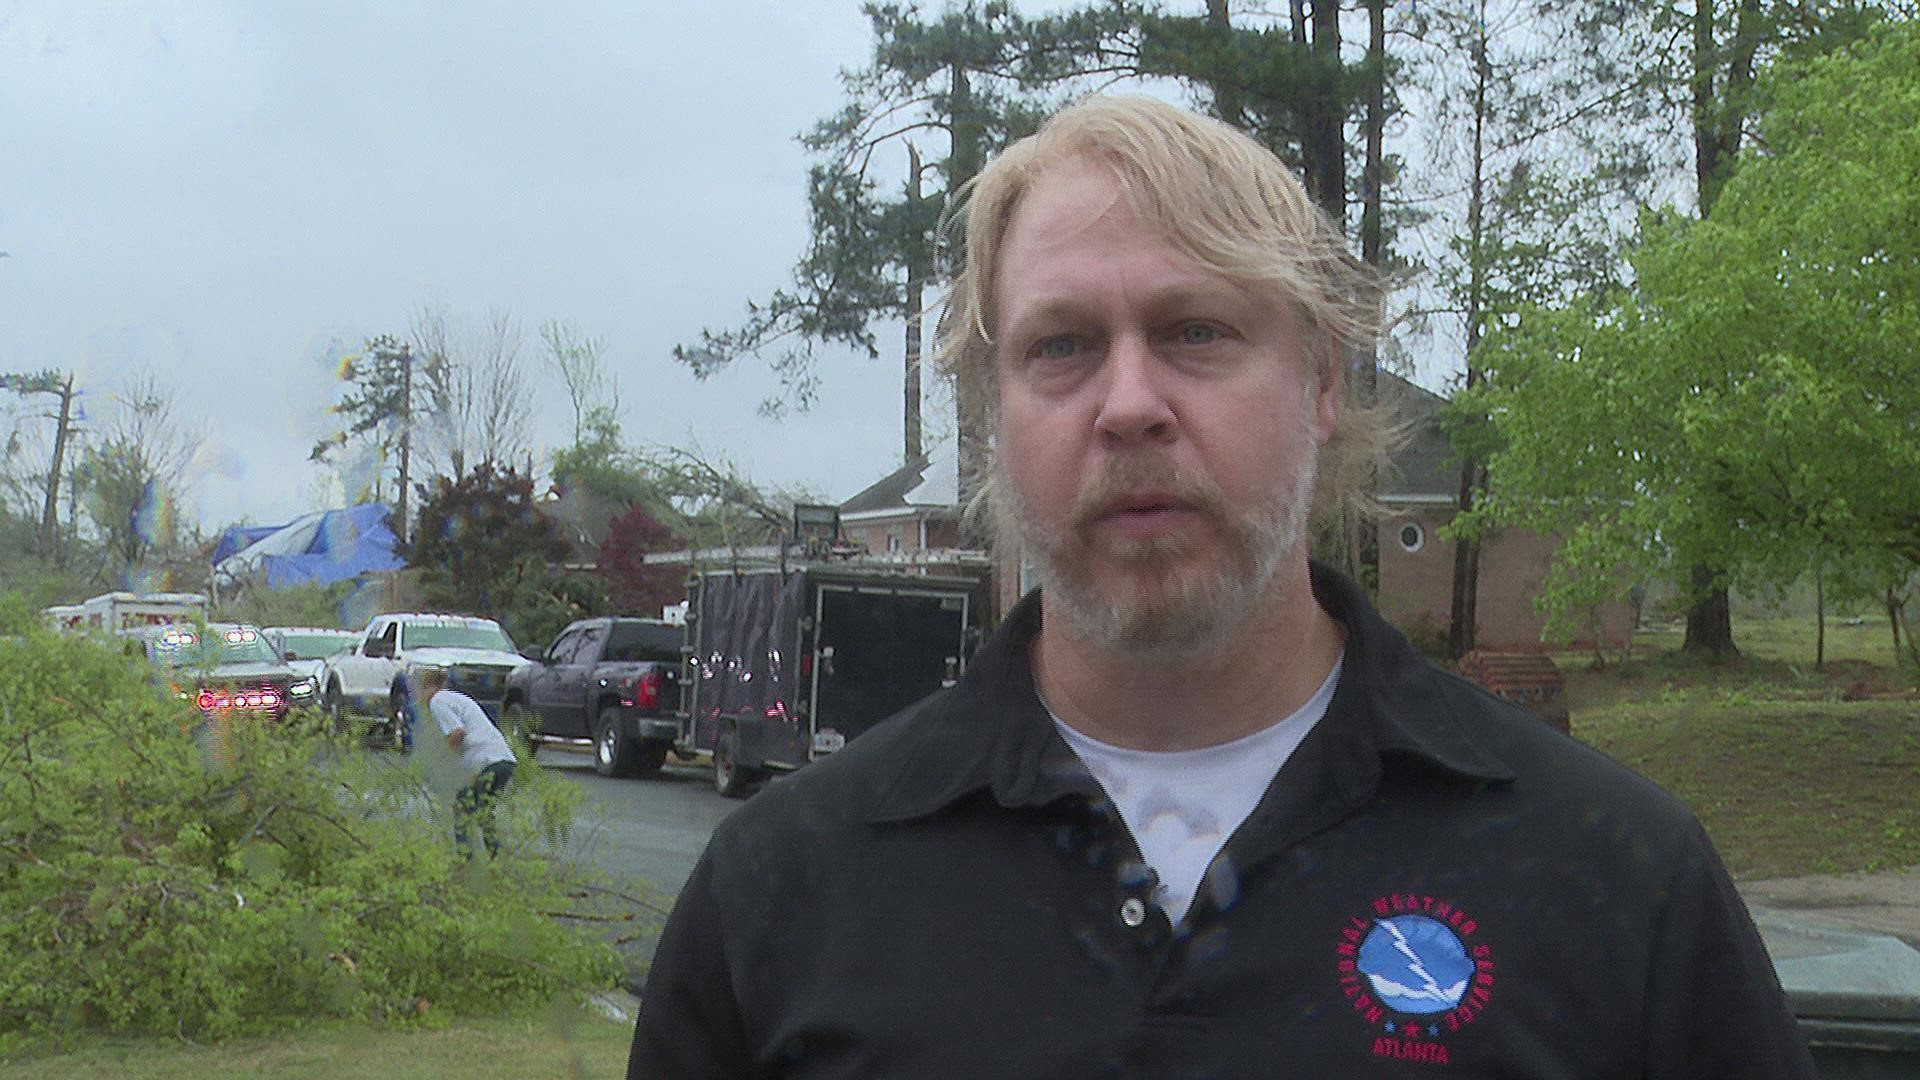 NWS Peachtree City Meteorologist-in-Charge Keith Stellman confirms Bonaire tornado.